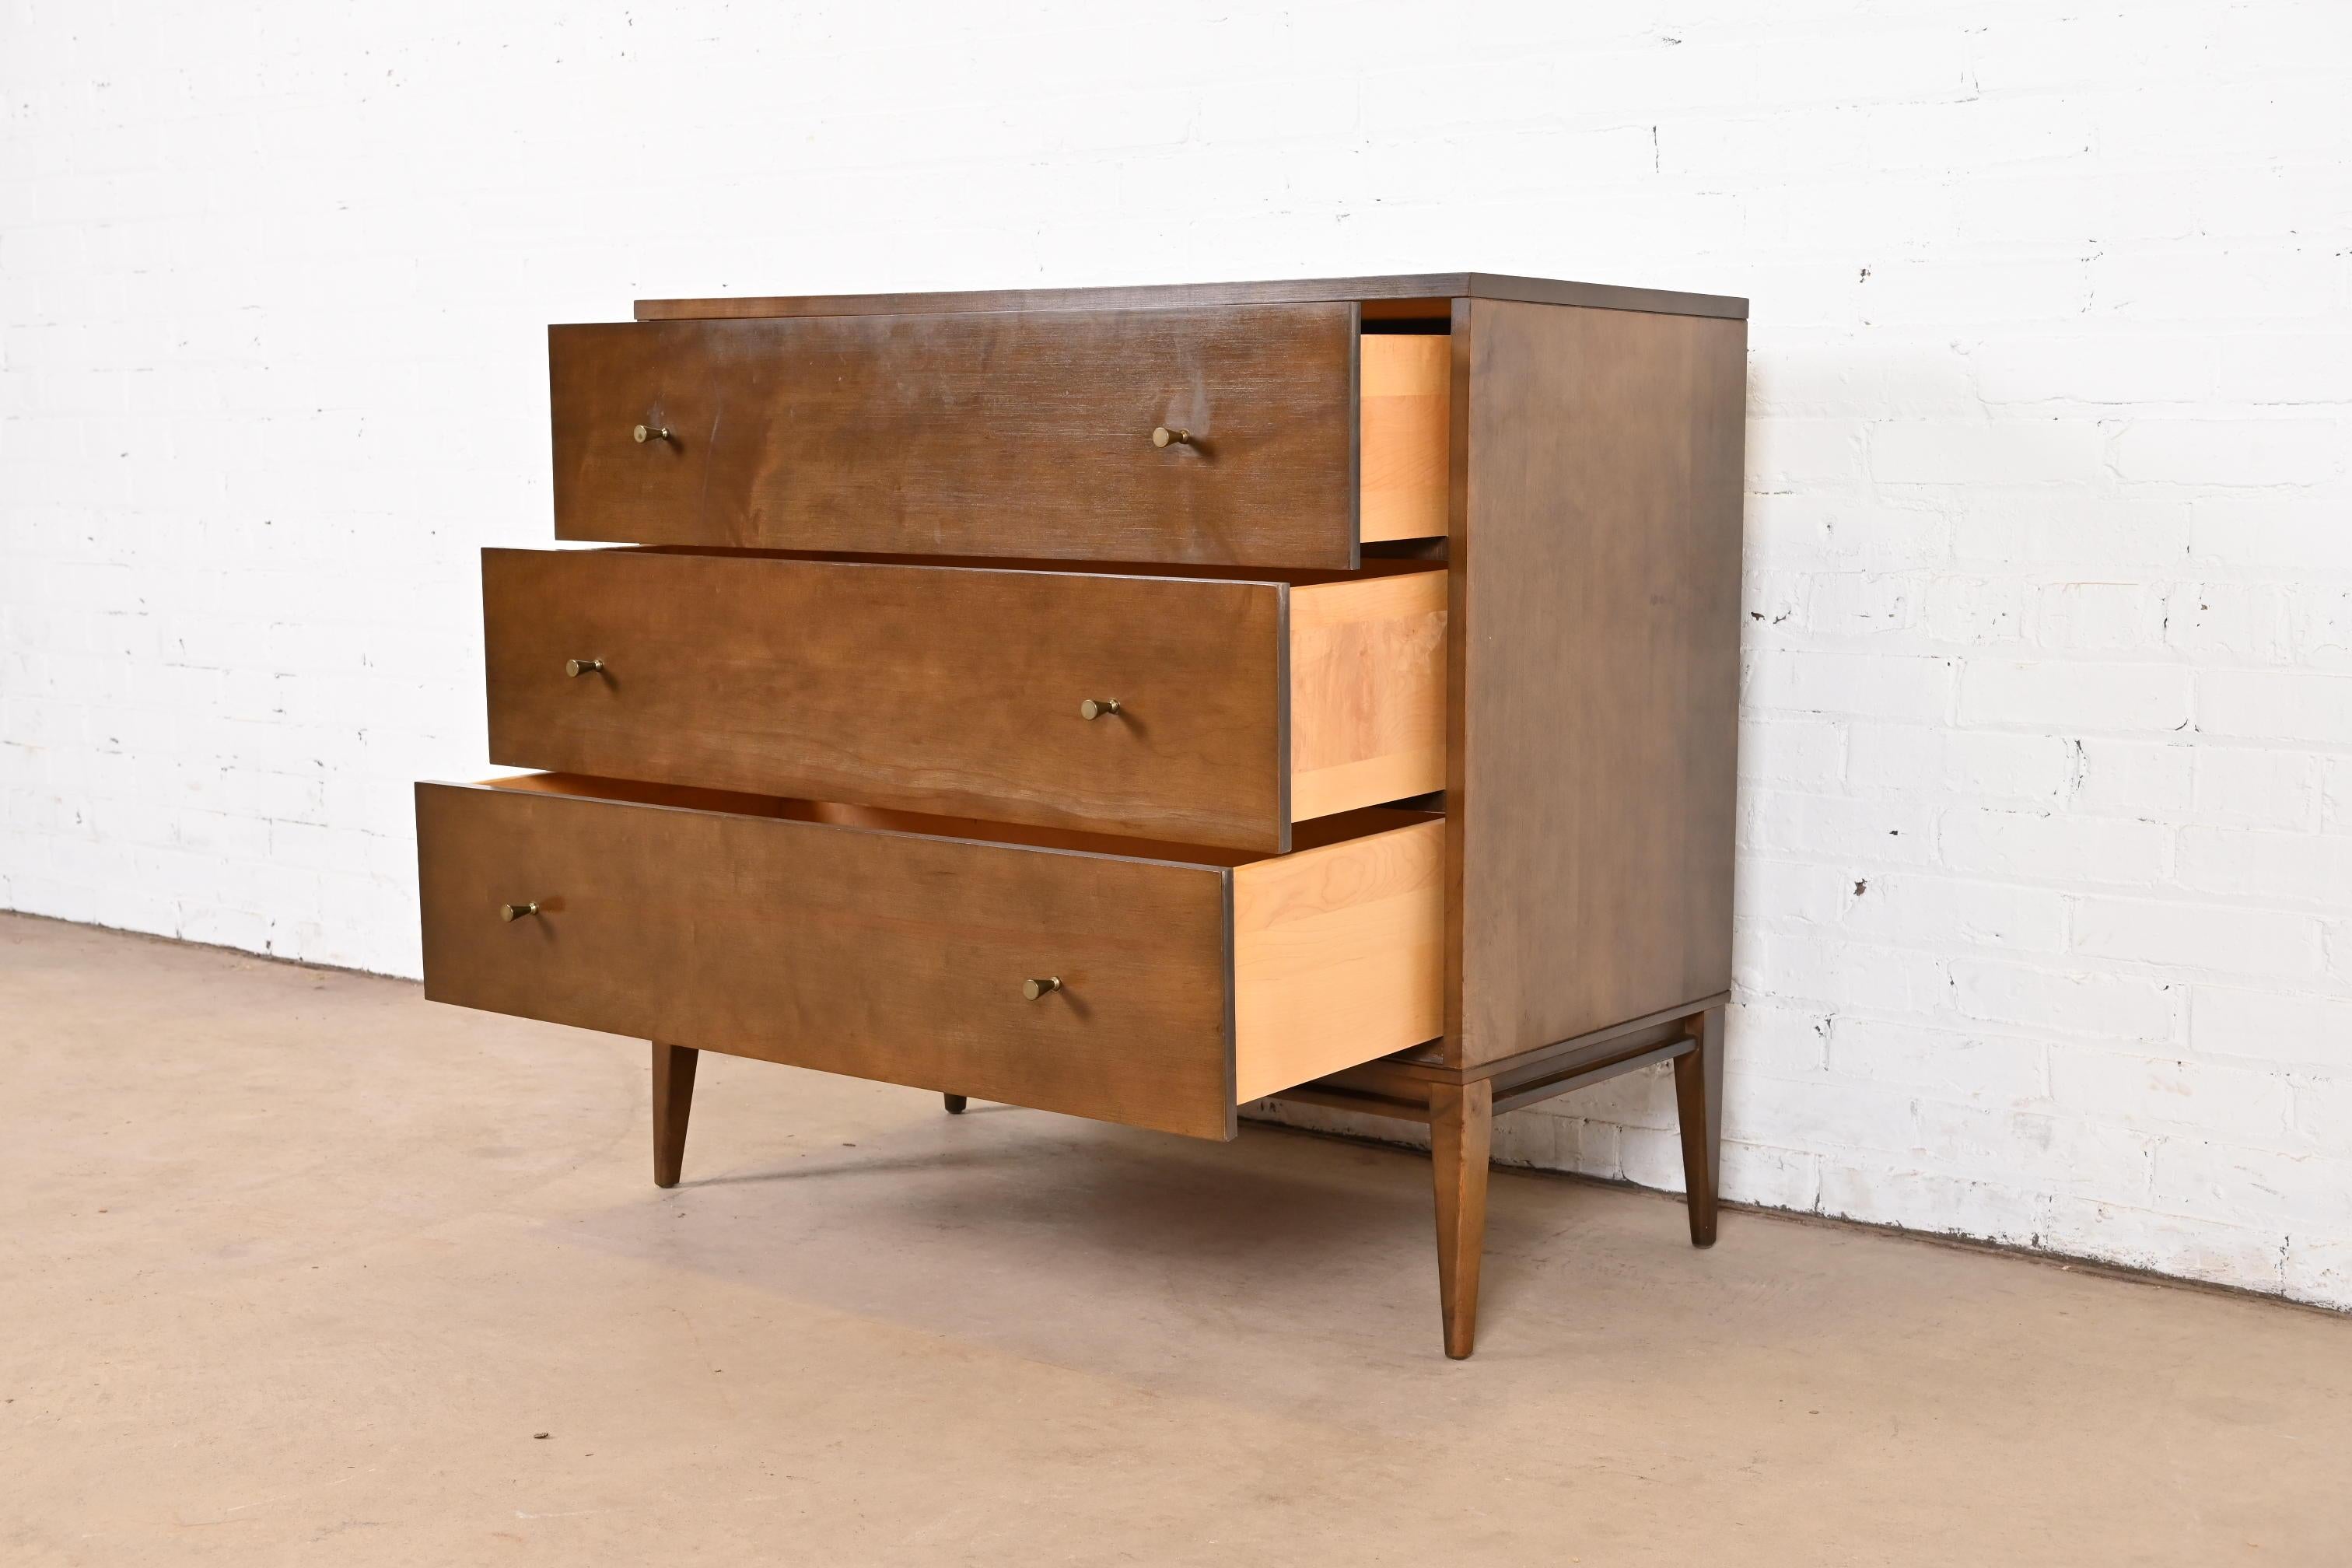 Brass Paul McCobb Planner Group Solid Birch Dresser or Chest of Drawers, 1950s For Sale